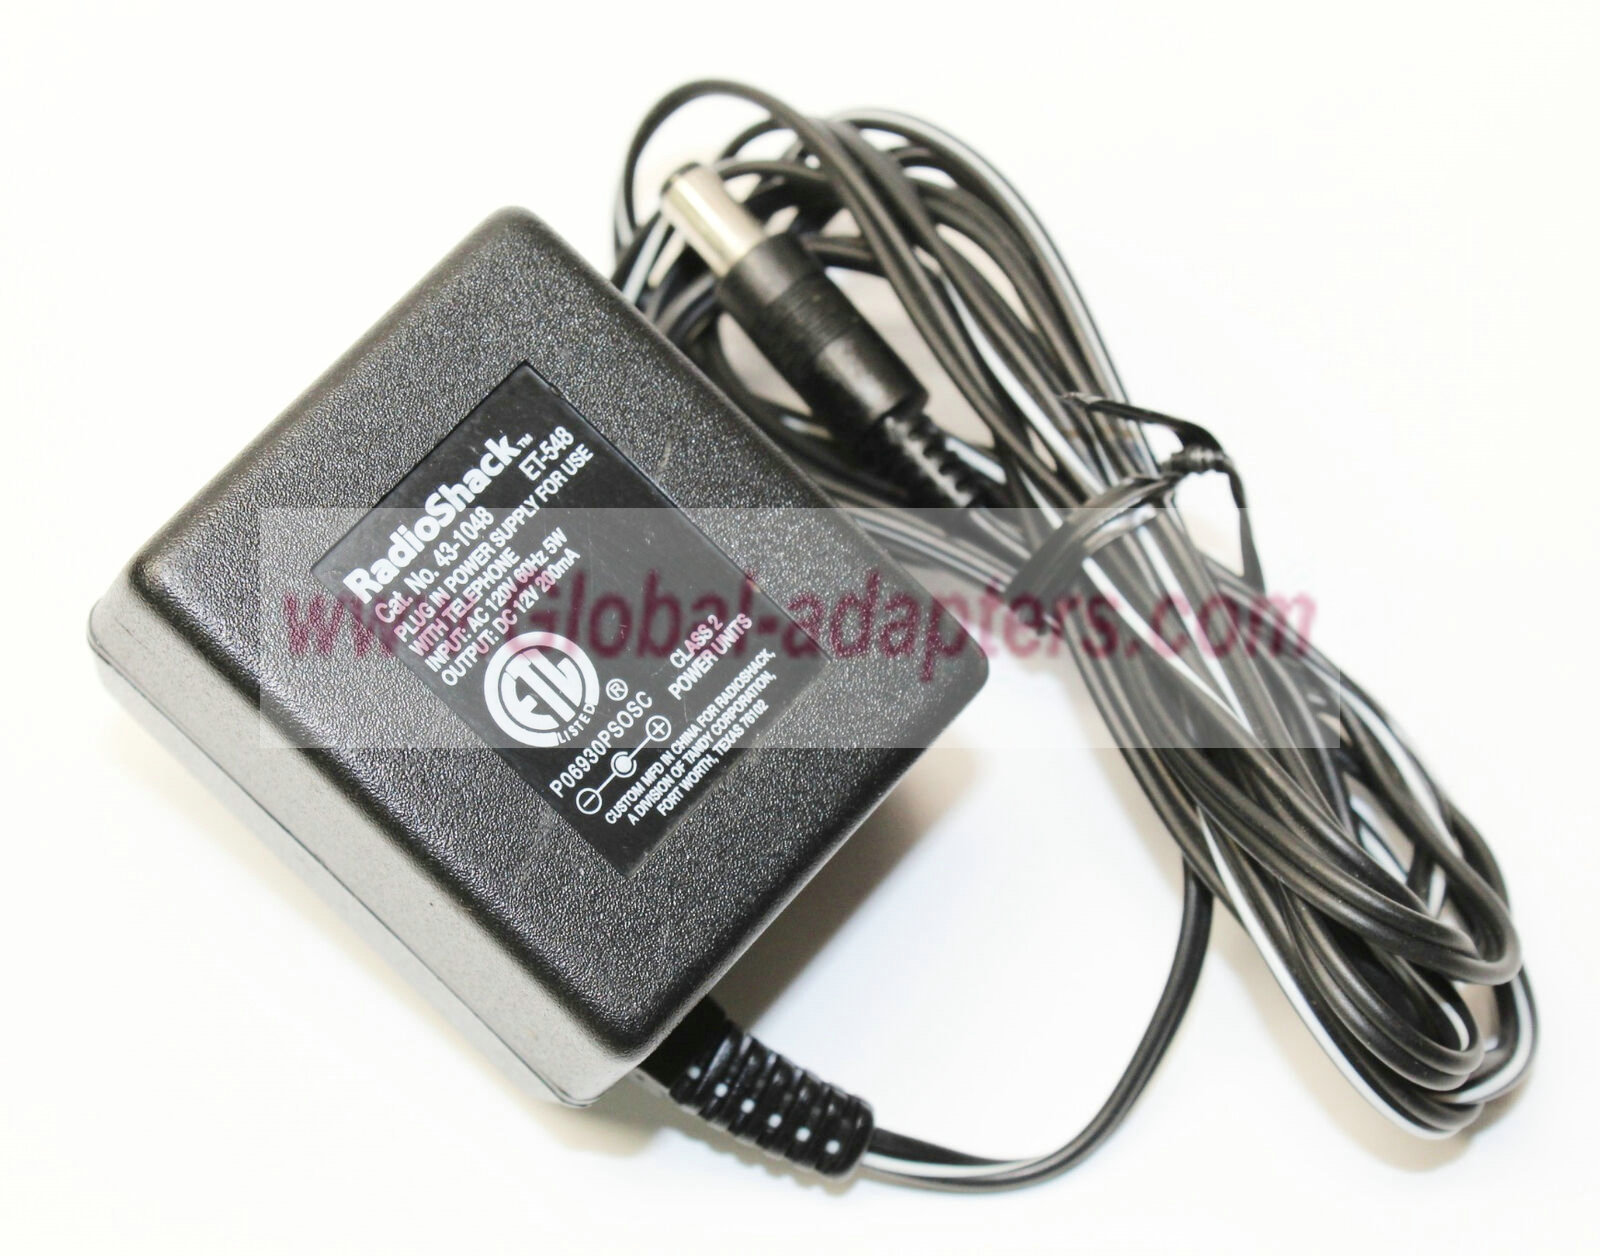 New 12V 200mA 43-1048 Power Supply AC Adapter Charger